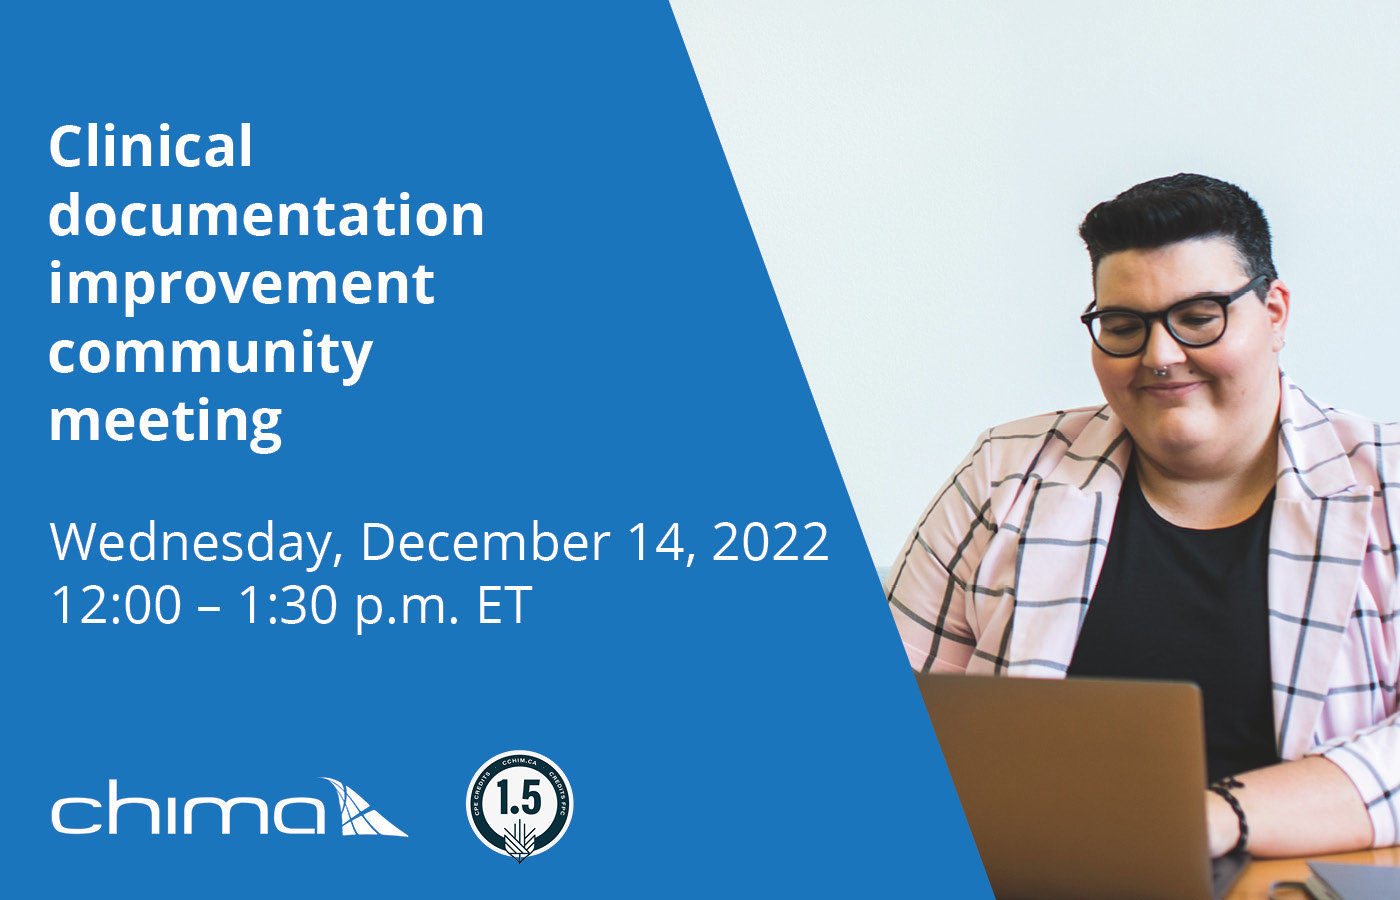 A banner for the CHIMA clinical document improvement community meeting coming up on December 14 from 12 - 1:30 pm Eastern time. There's a blue background on the left half and an image of a white person smiling, wearing glasses. They're working on a laptop, and wearing a blight blazer with black large checkered pattern, and a black shirt underneath.